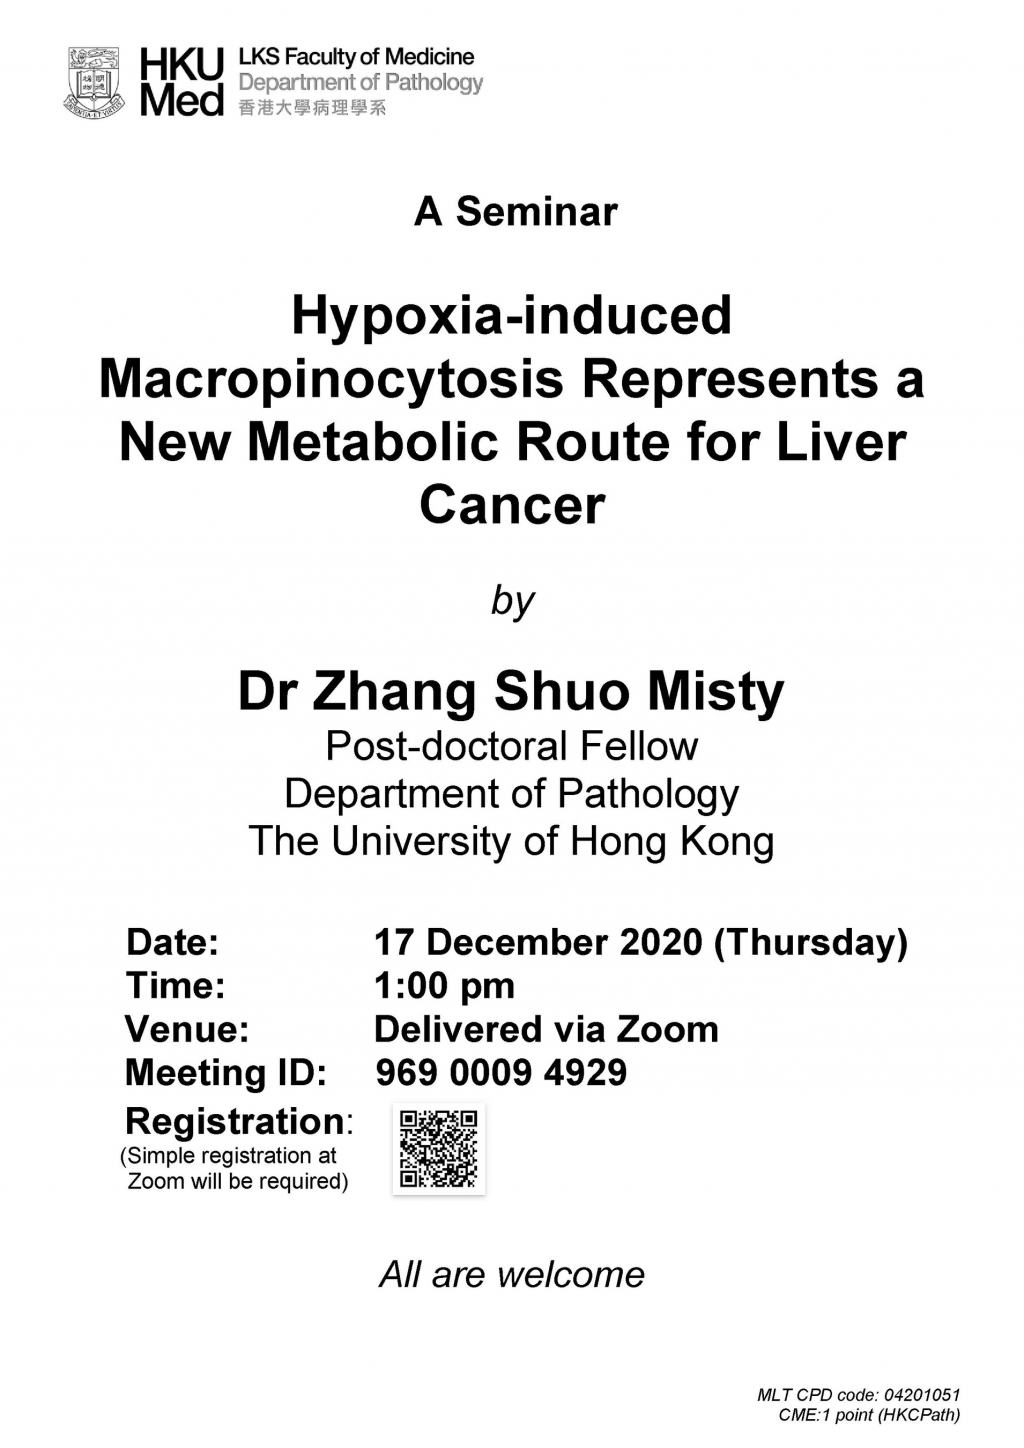 Seminar by Dr Zhang Shuo Misty on 17 Dec (1 pm)